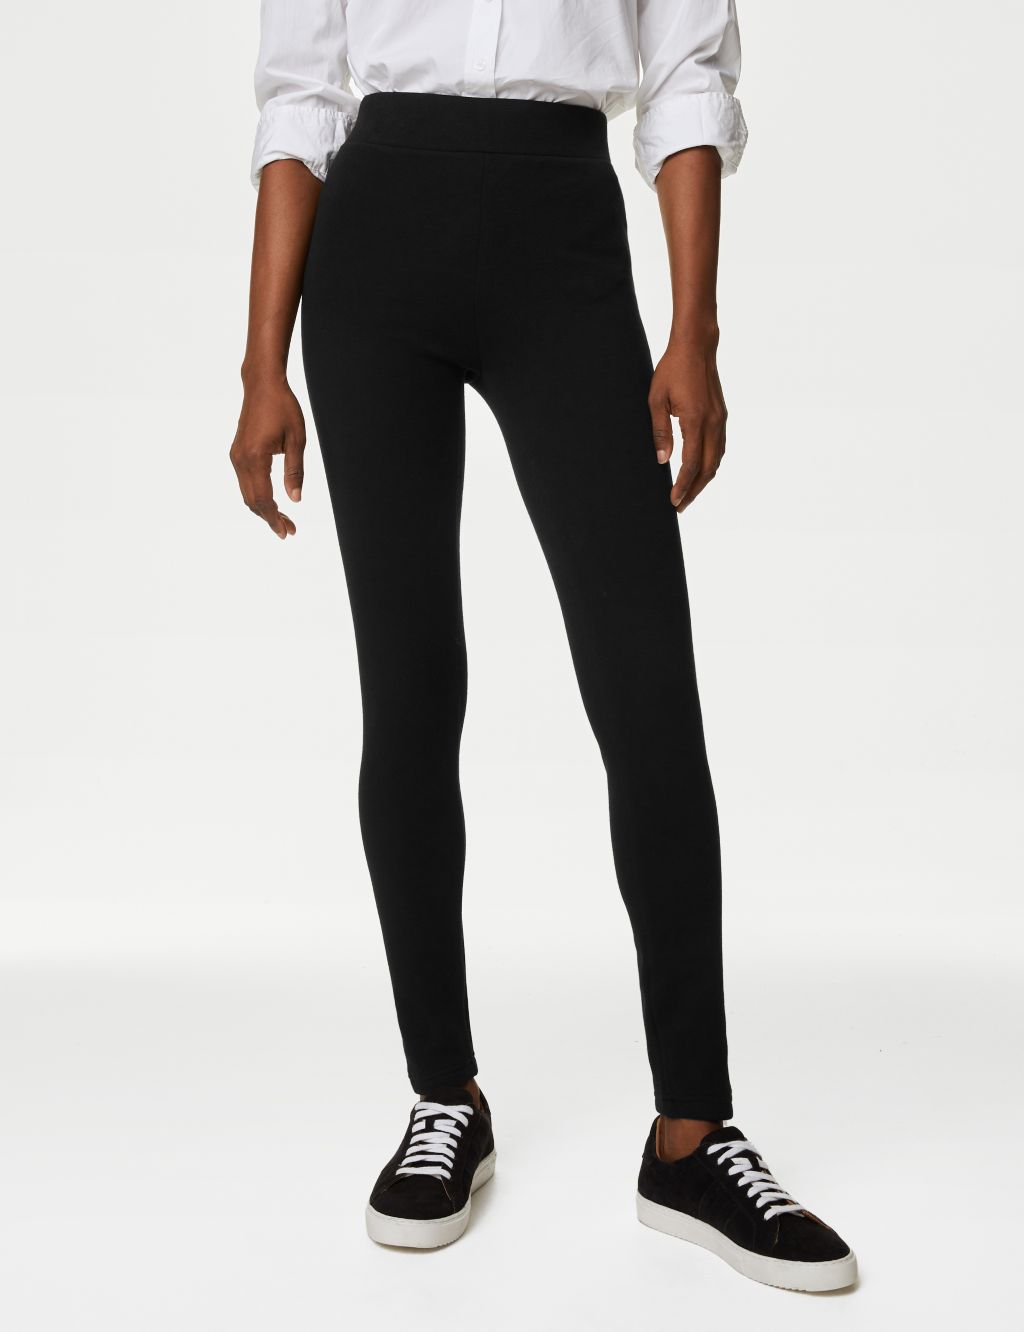 Thermal High Waisted Leggings image 3